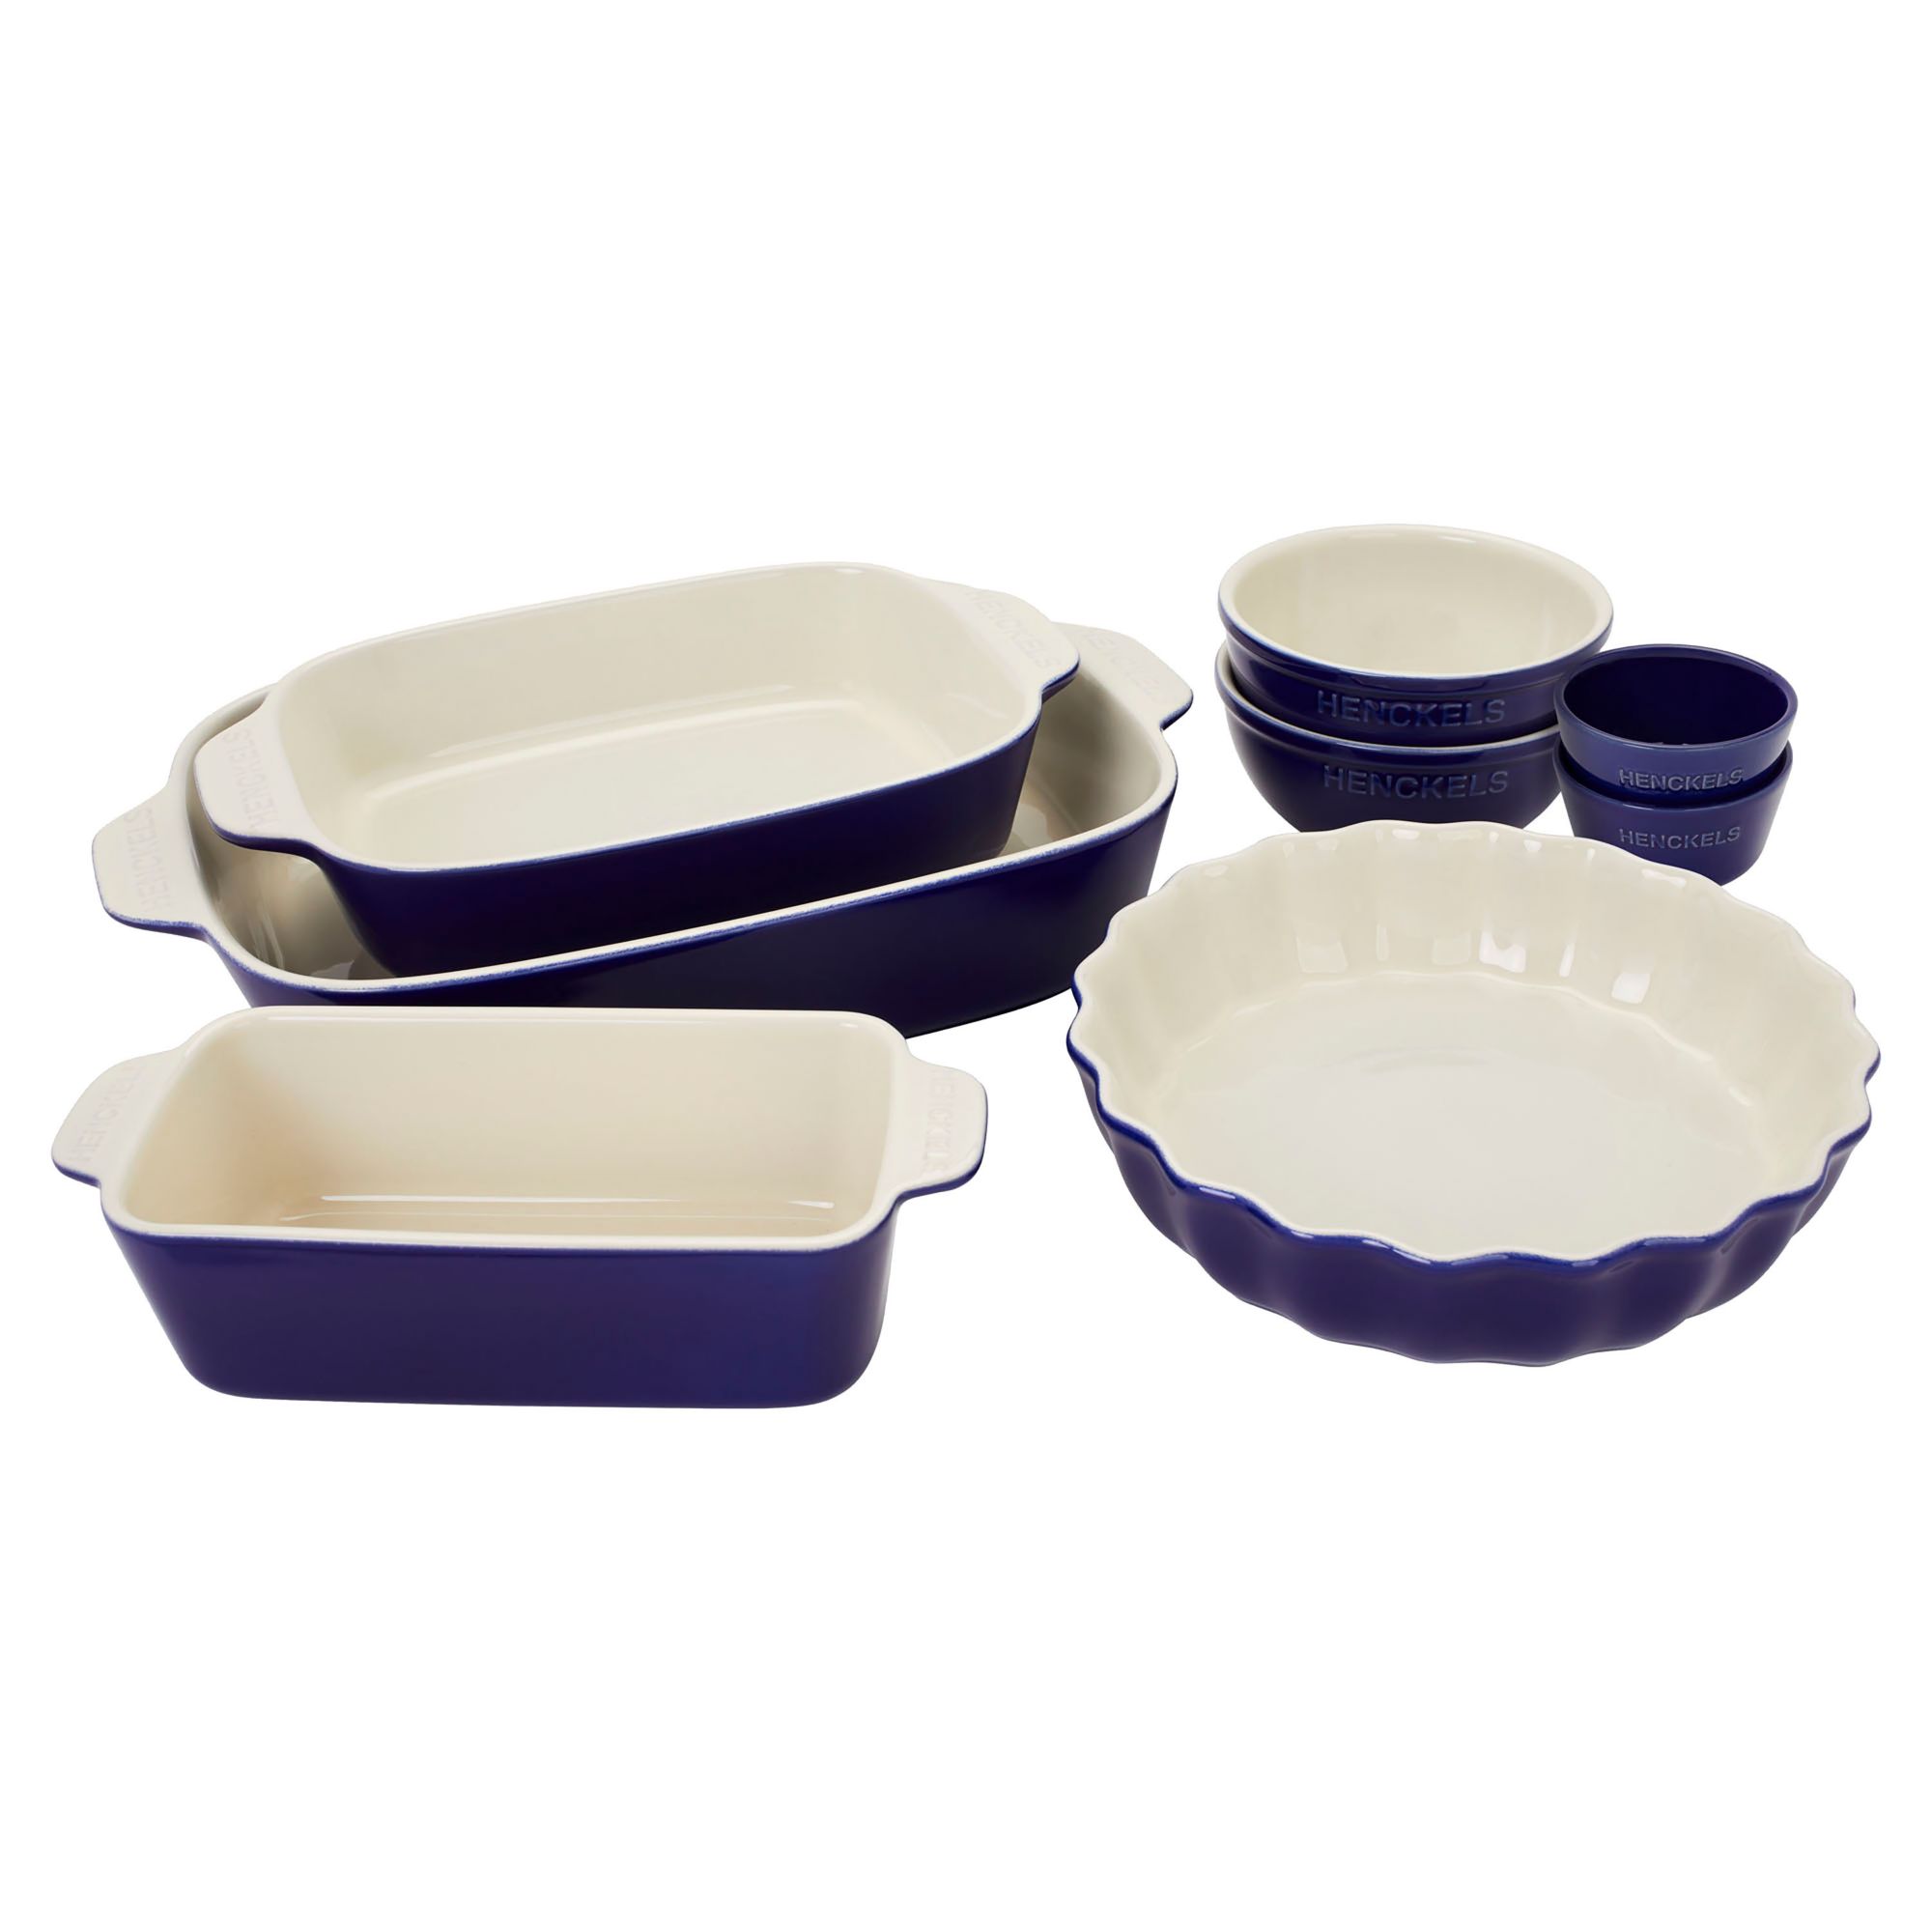 Gibson Home Nesting Bakeware Set - new - household items - by